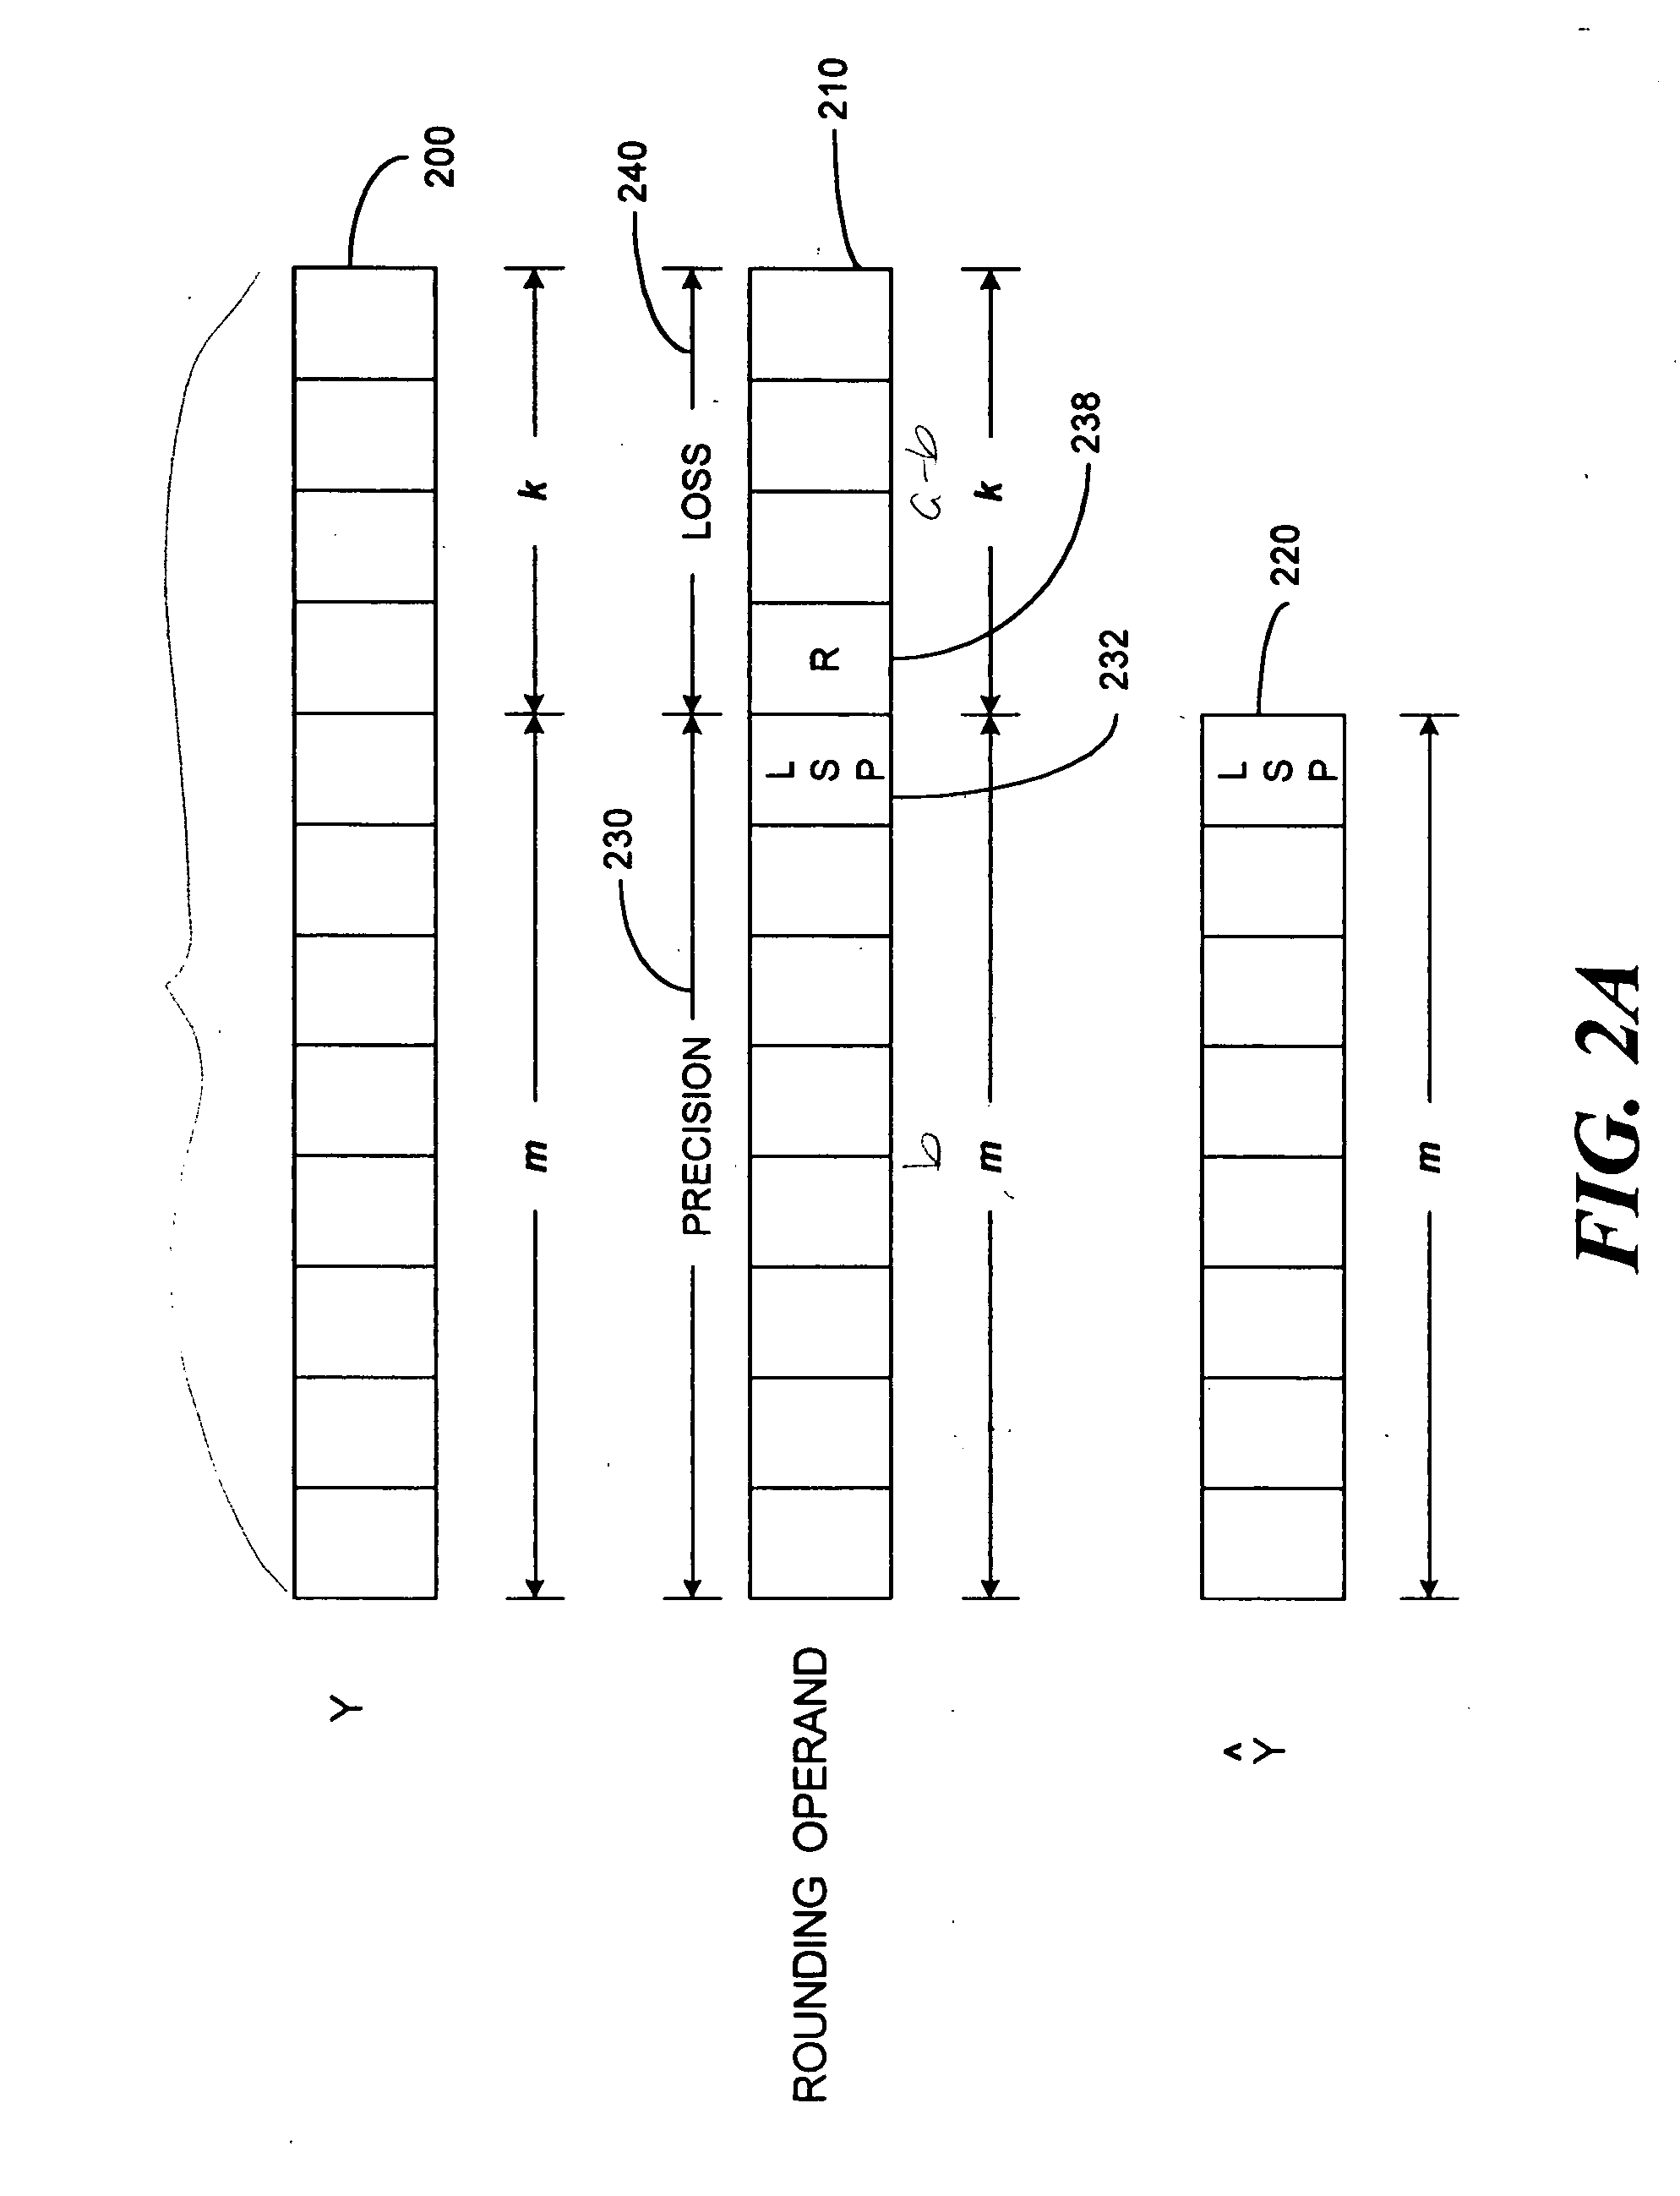 Apparatus and method for reducing precision of data